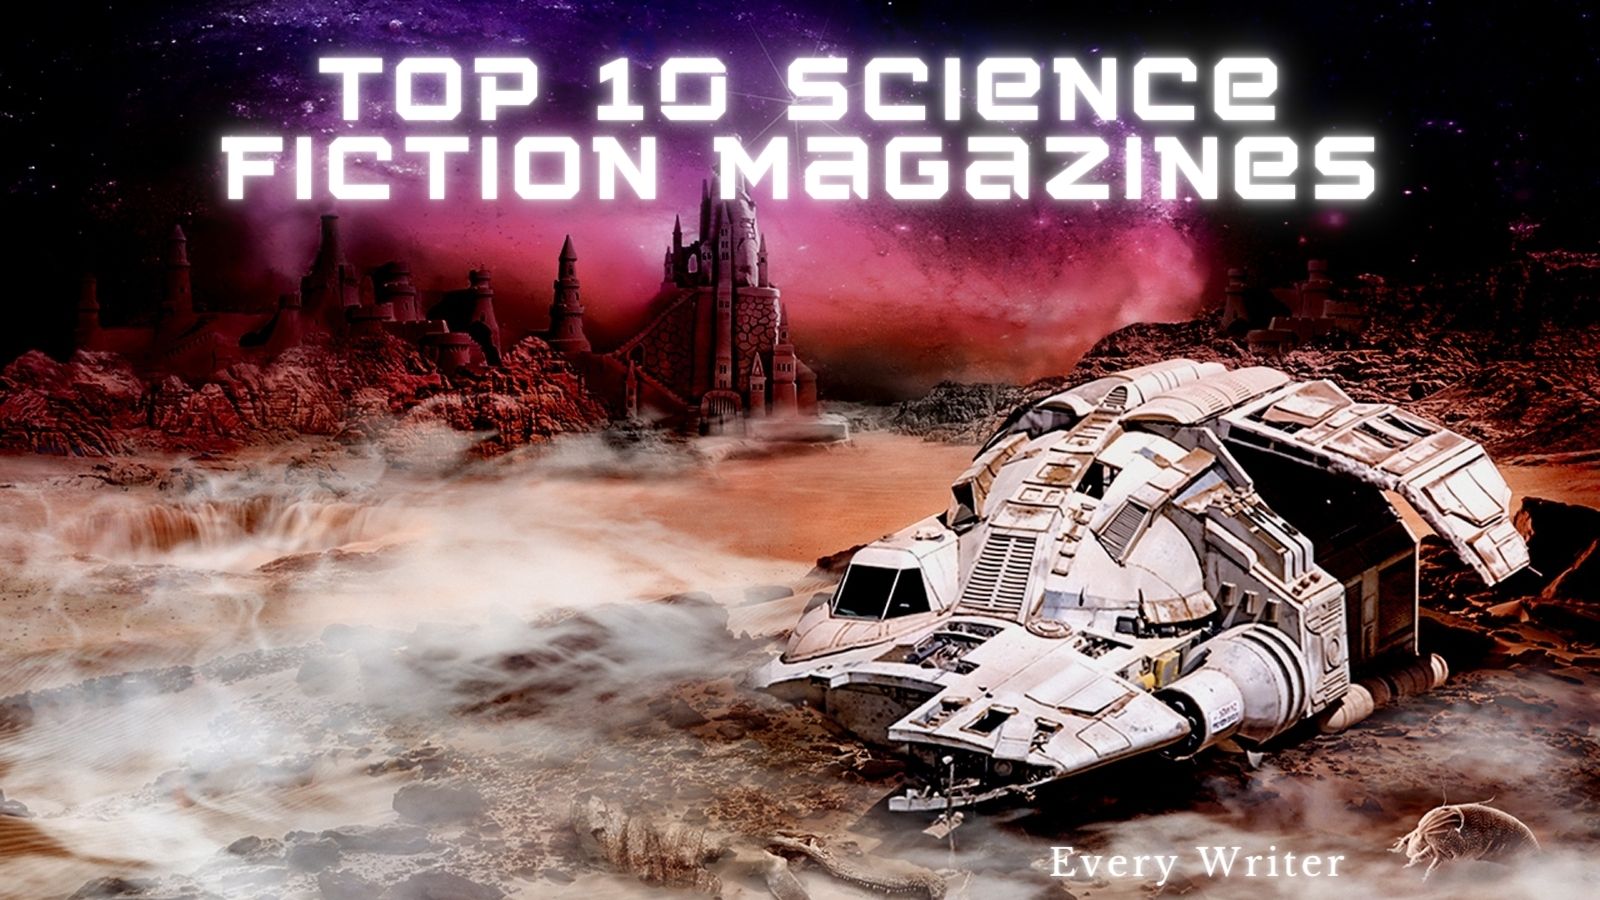 Top 10 Science Fiction Magazines - EveryWriter